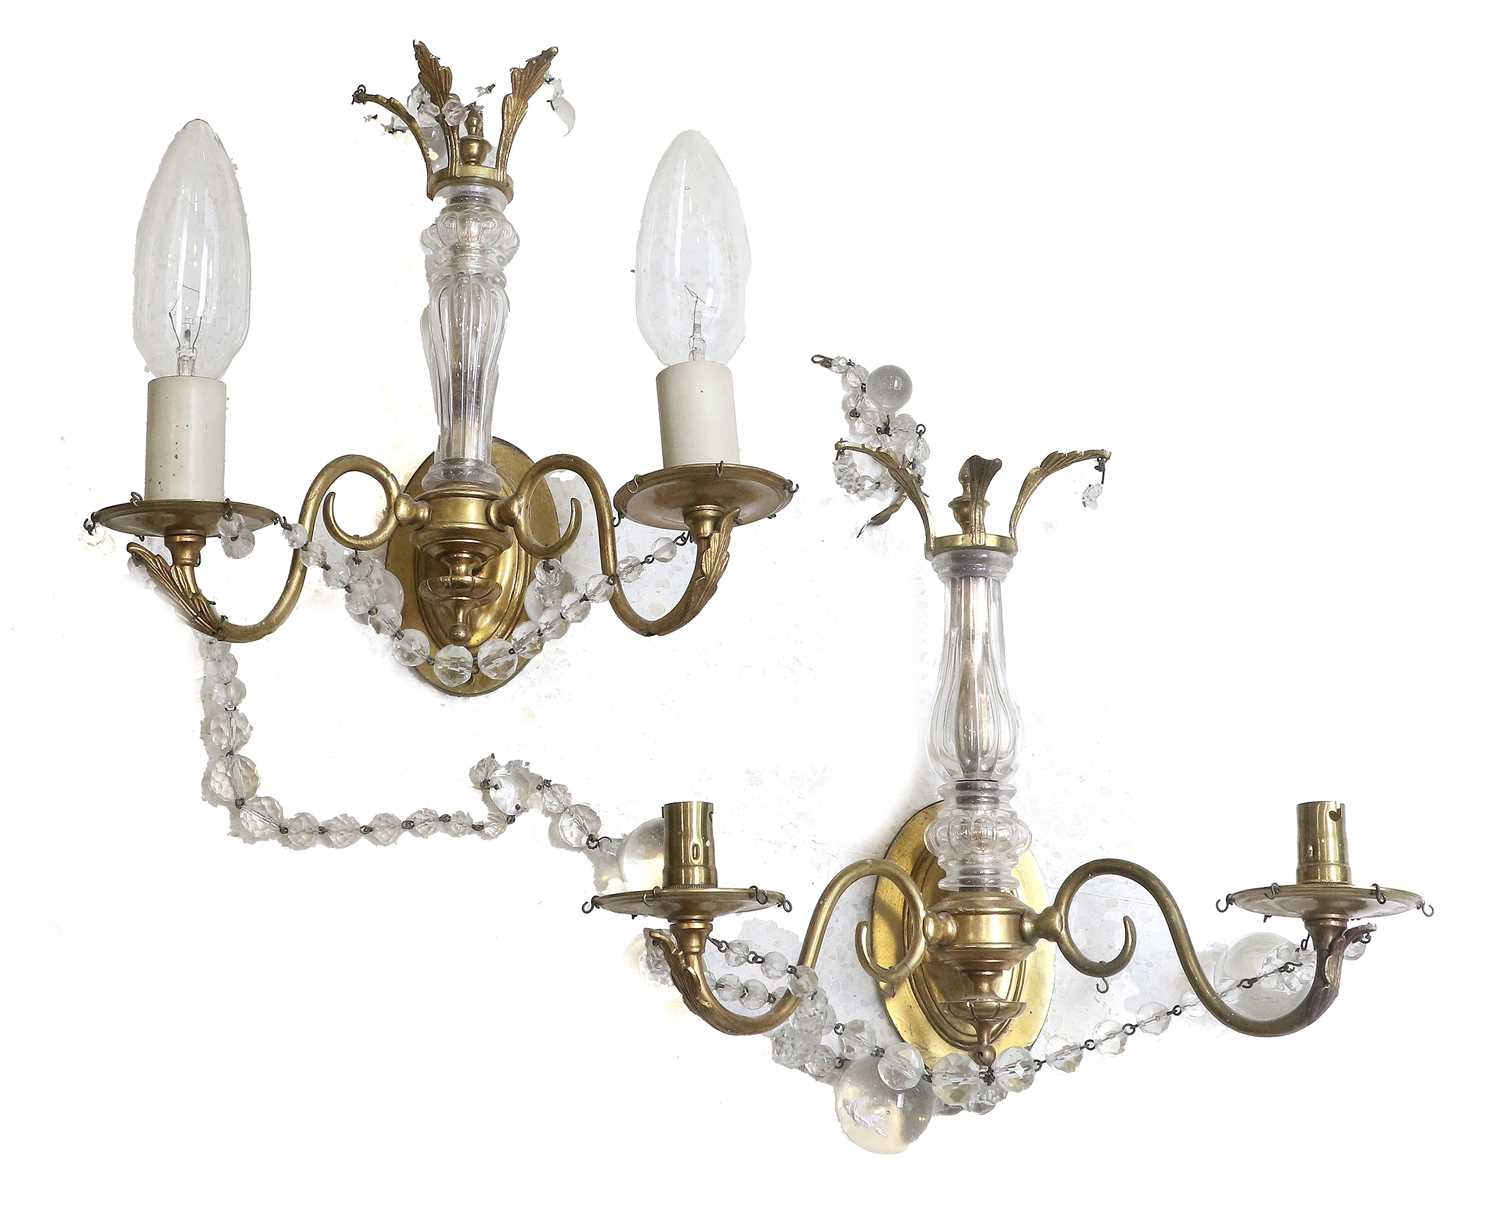 A Cut-Glass-Mounted Gilt-Metal Six-Light Electrolier, late 19th/20th century, with fluted baluster - Image 3 of 7